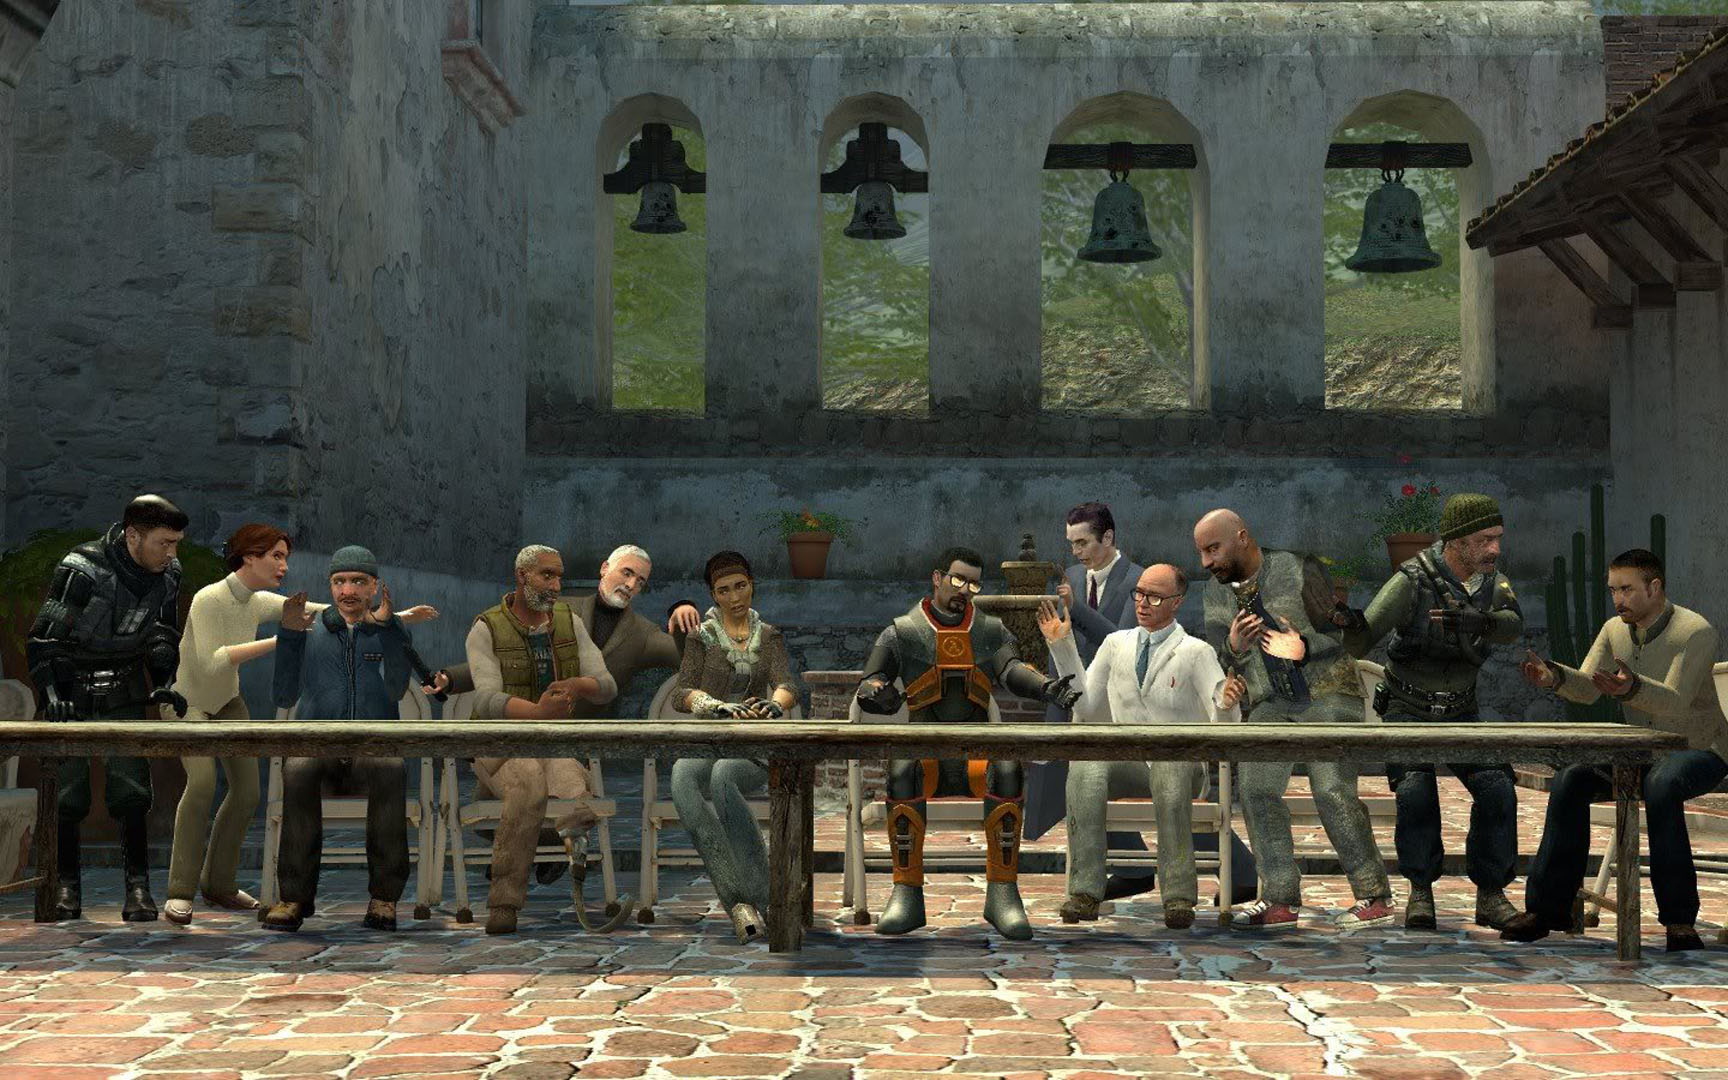 The Last Supper Action Games Wallpaper Image Featuring Half Life